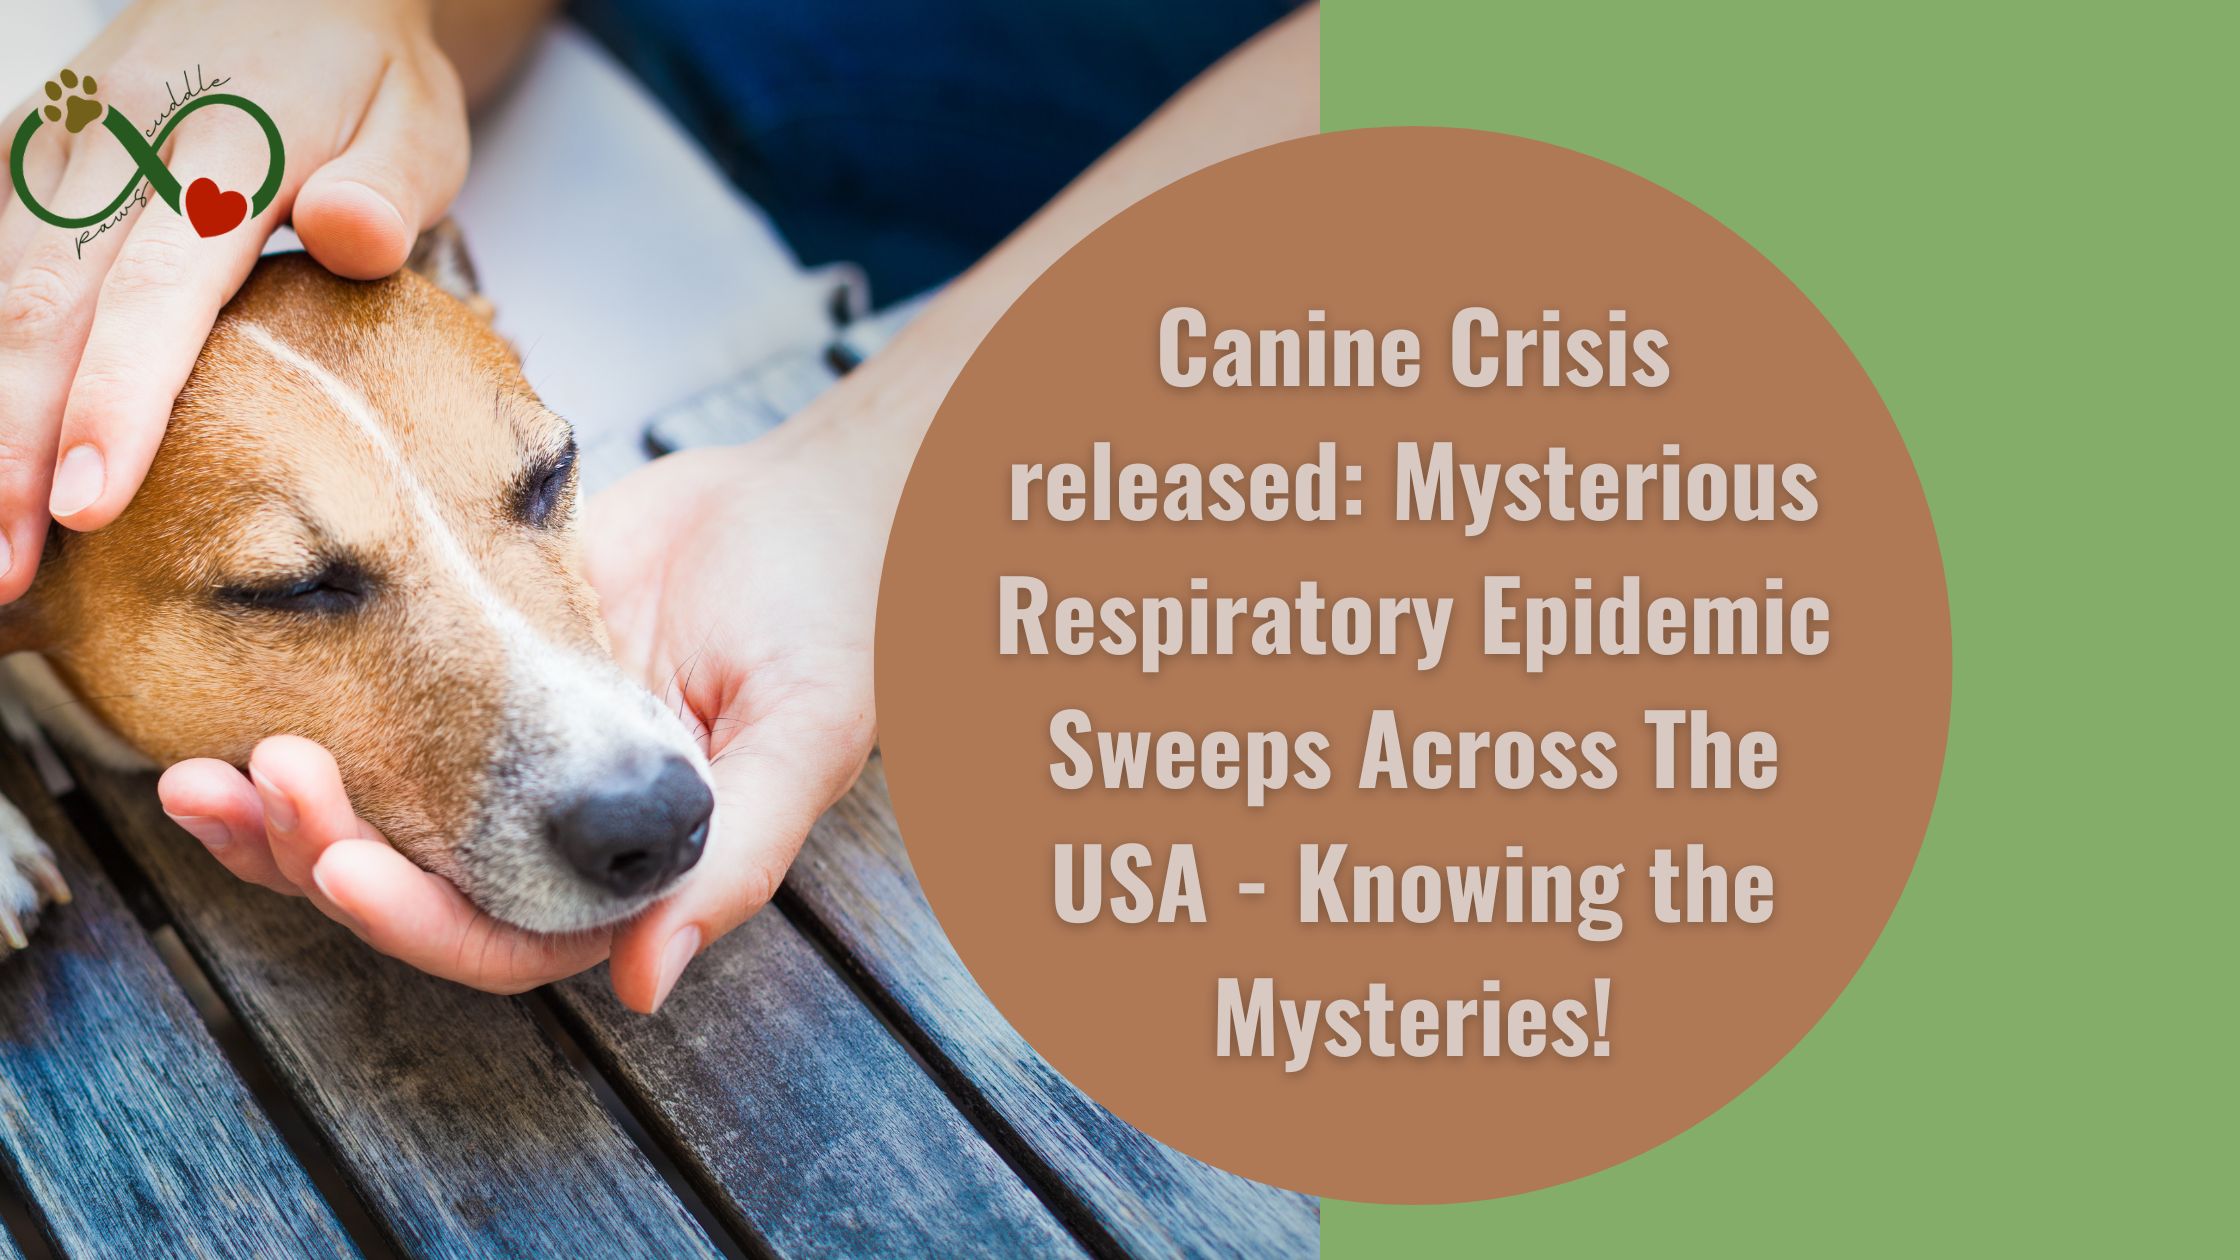 Canine Crisis released: Mysterious Respiratory Epidemic Sweeps Across The USA - Knowing the Mysteries!